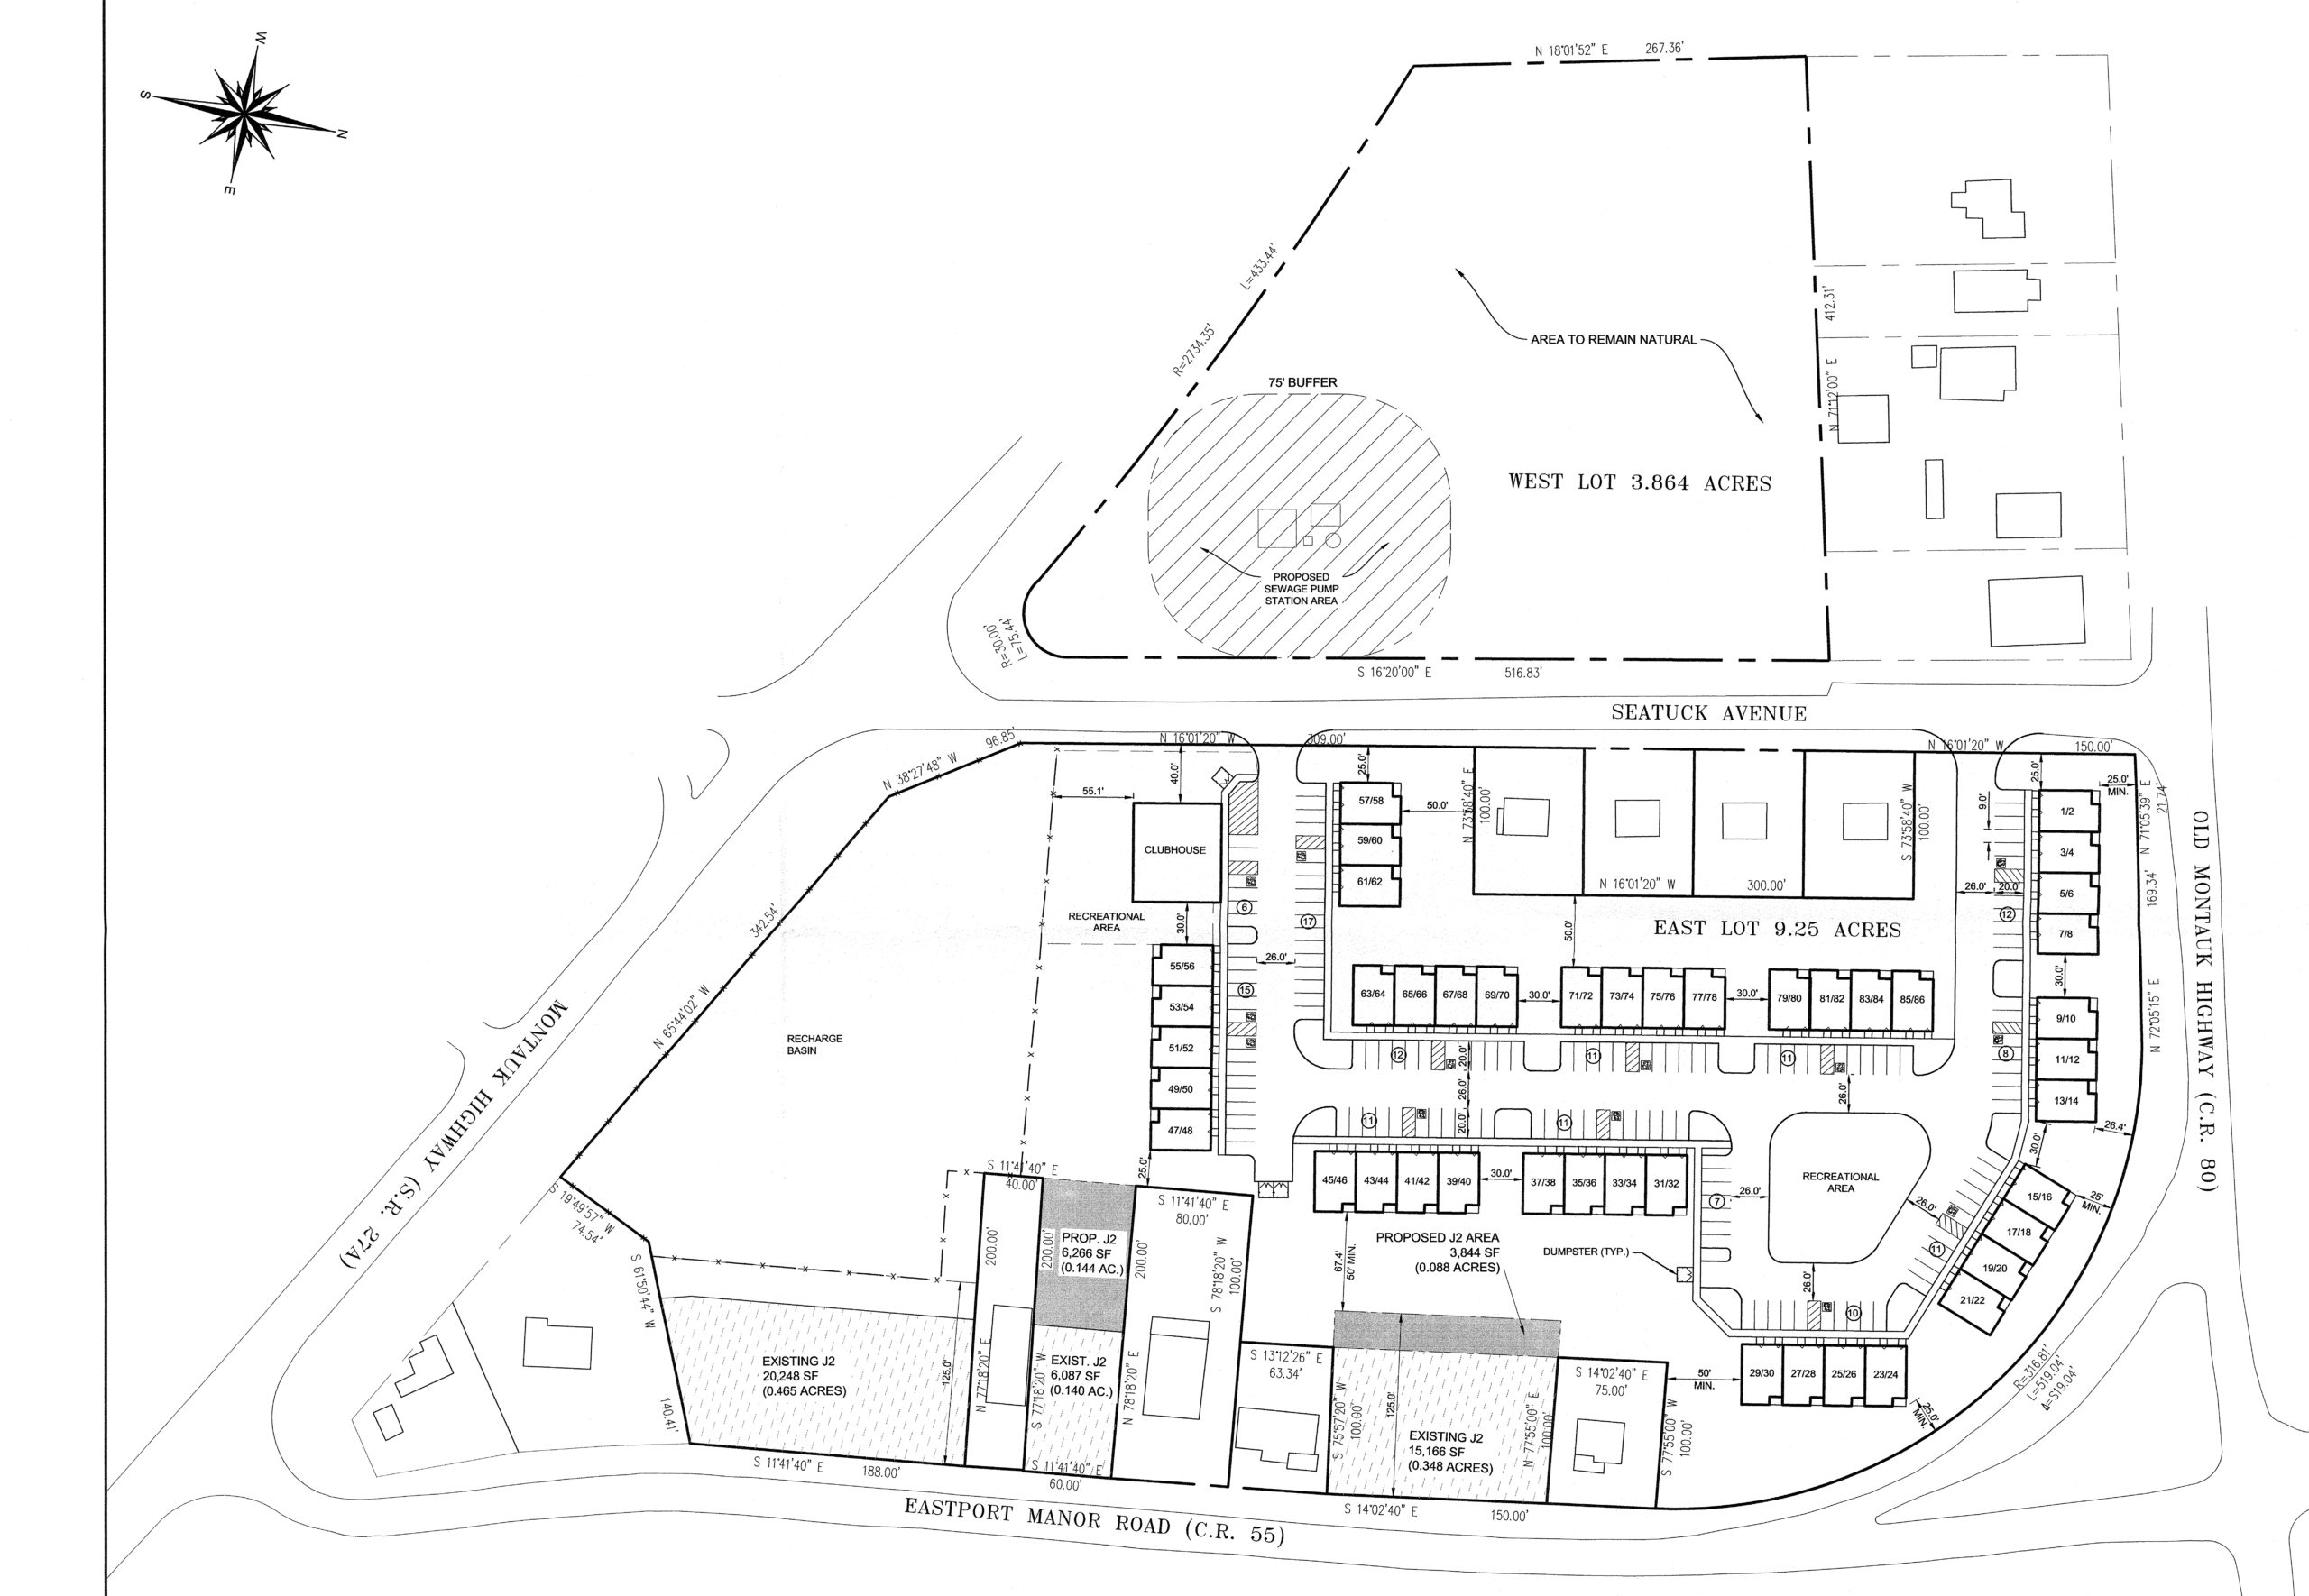 An 86-unit planned retirement community is proposed in Eastport.